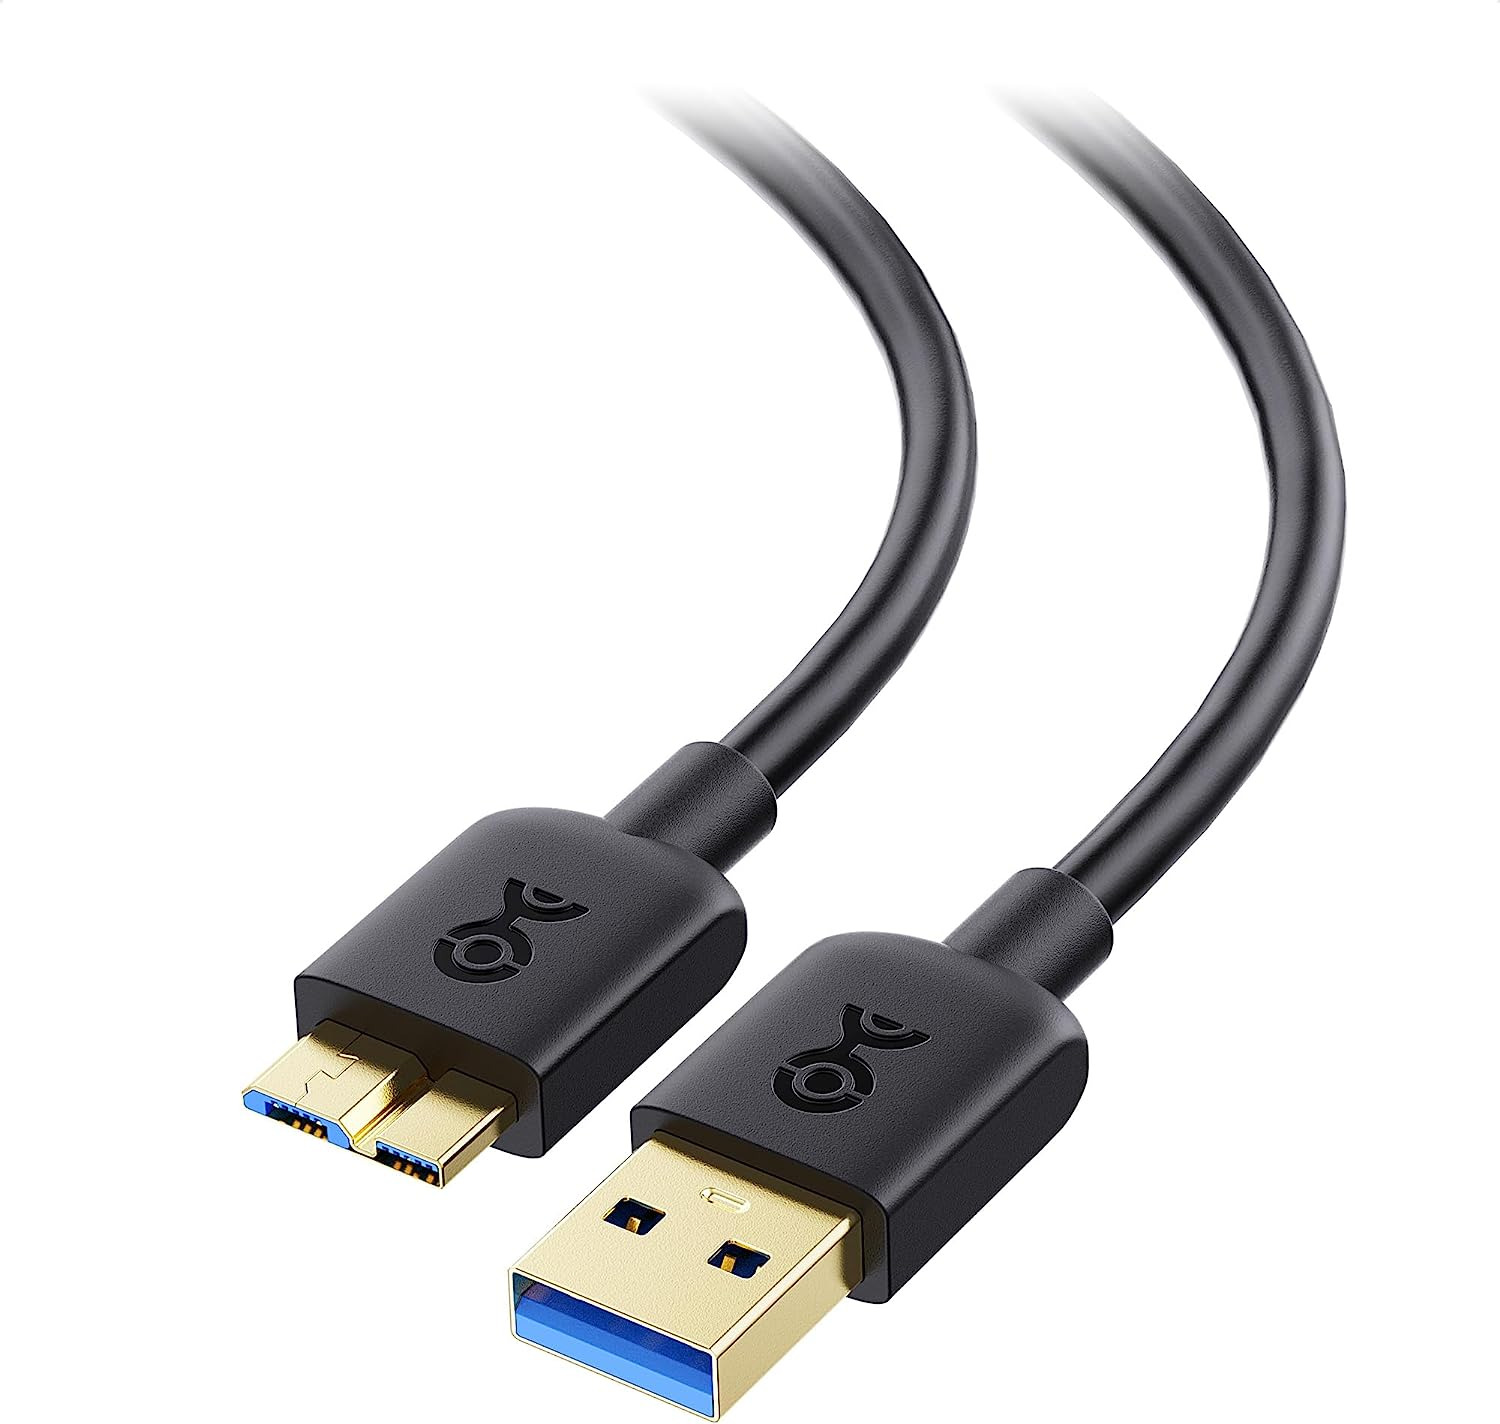 Cable Matters Short Micro USB 3.0 Cable 1.6 Ft (External Hard Drive Cable, USB t